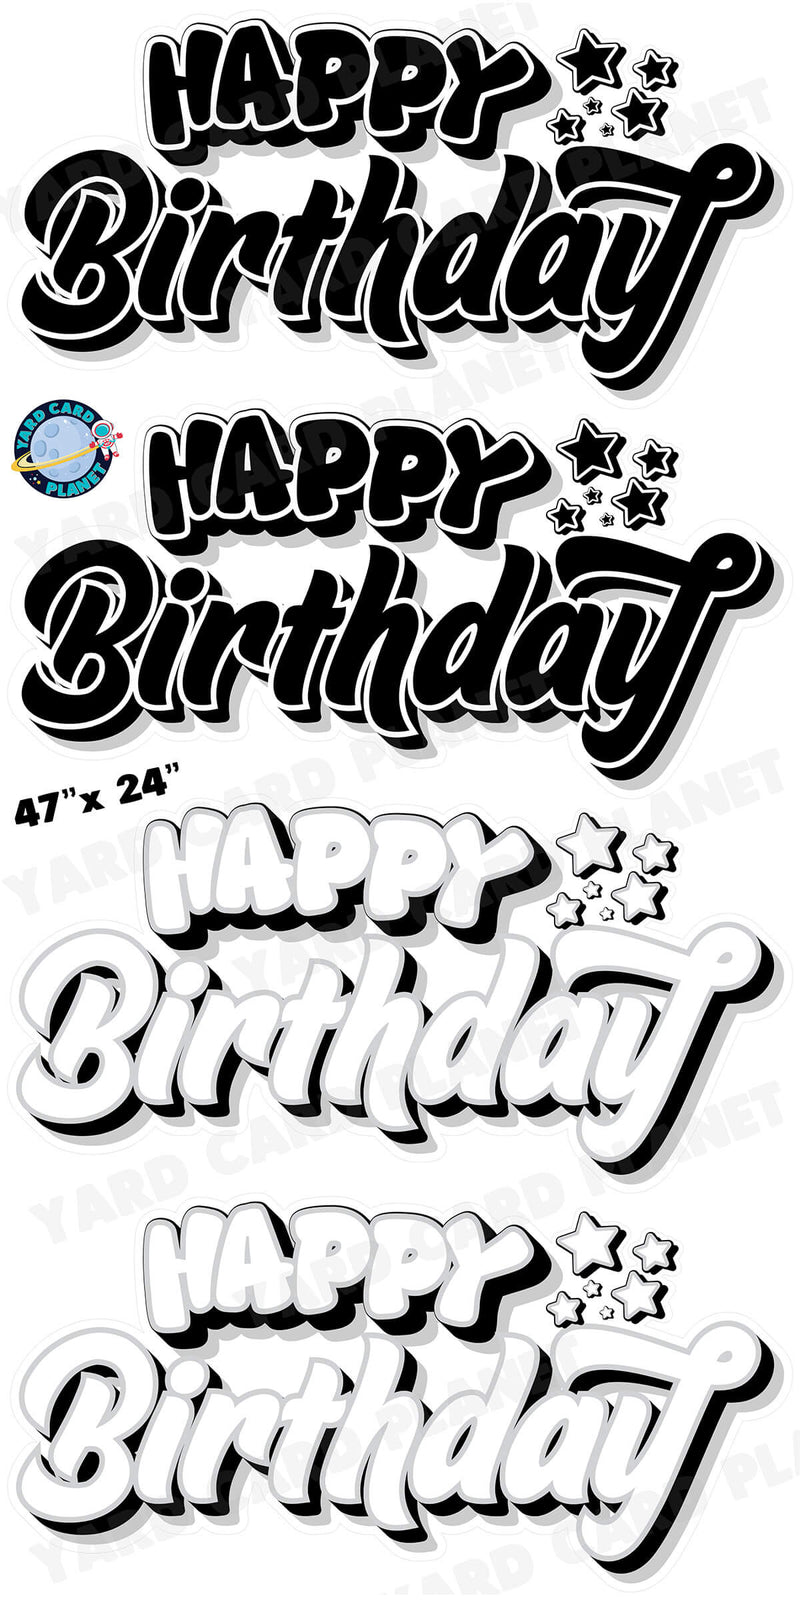 Happy Birthday EZ Quick Signs in Solid Black and White Yard Card Set with Measurements